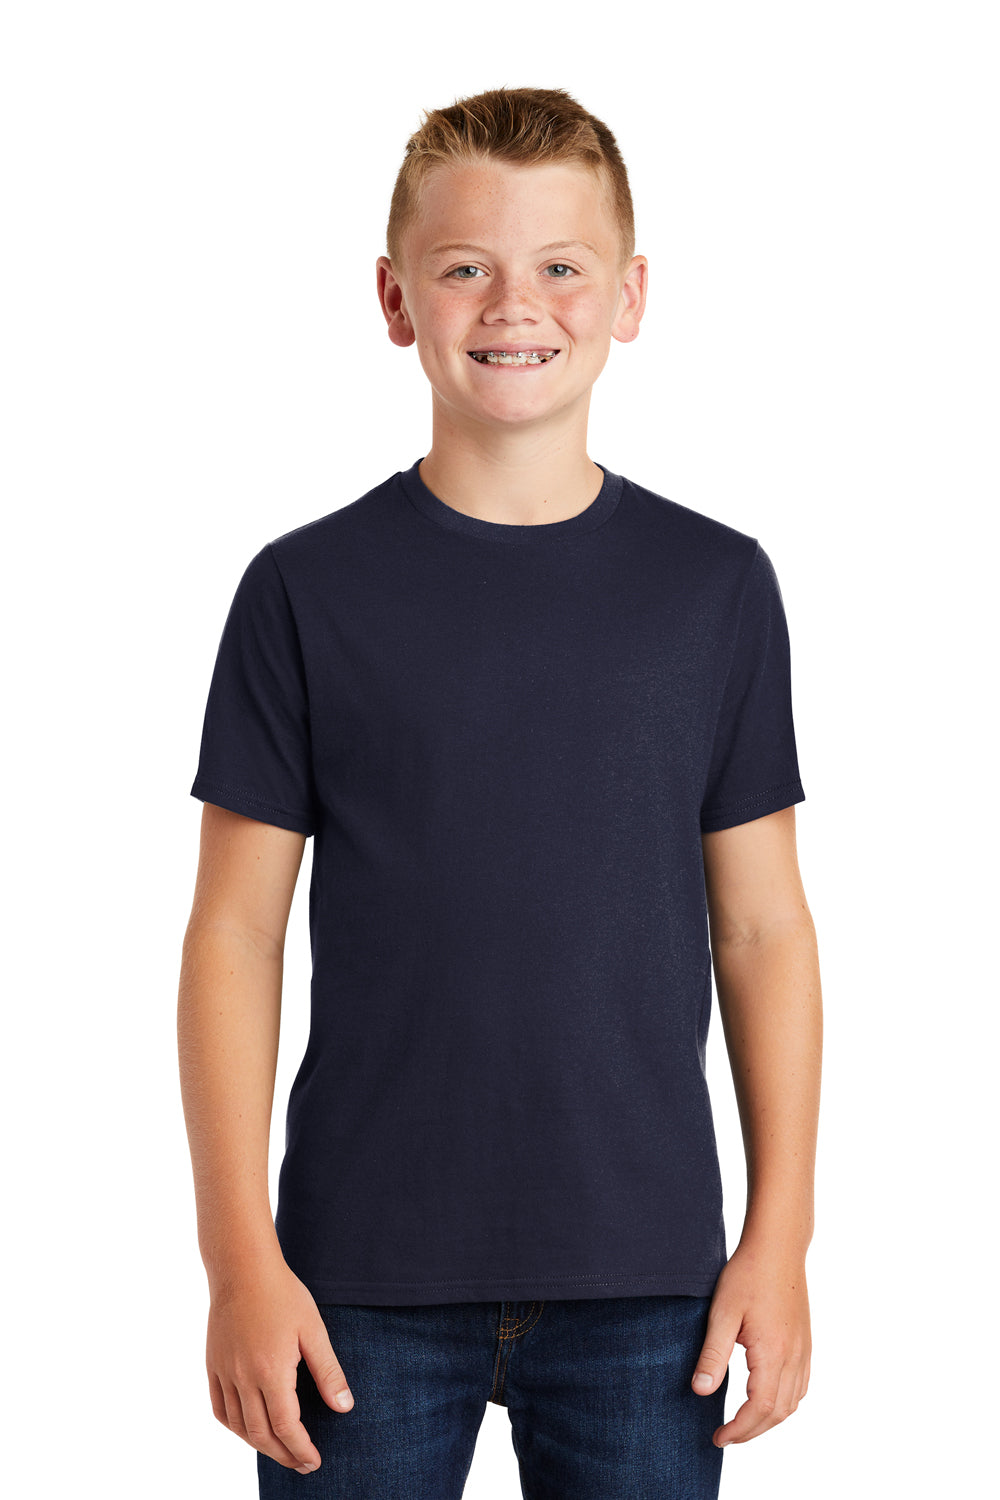 District DT6000Y Youth Very Important Short Sleeve Crewneck T-Shirt Navy Blue Front